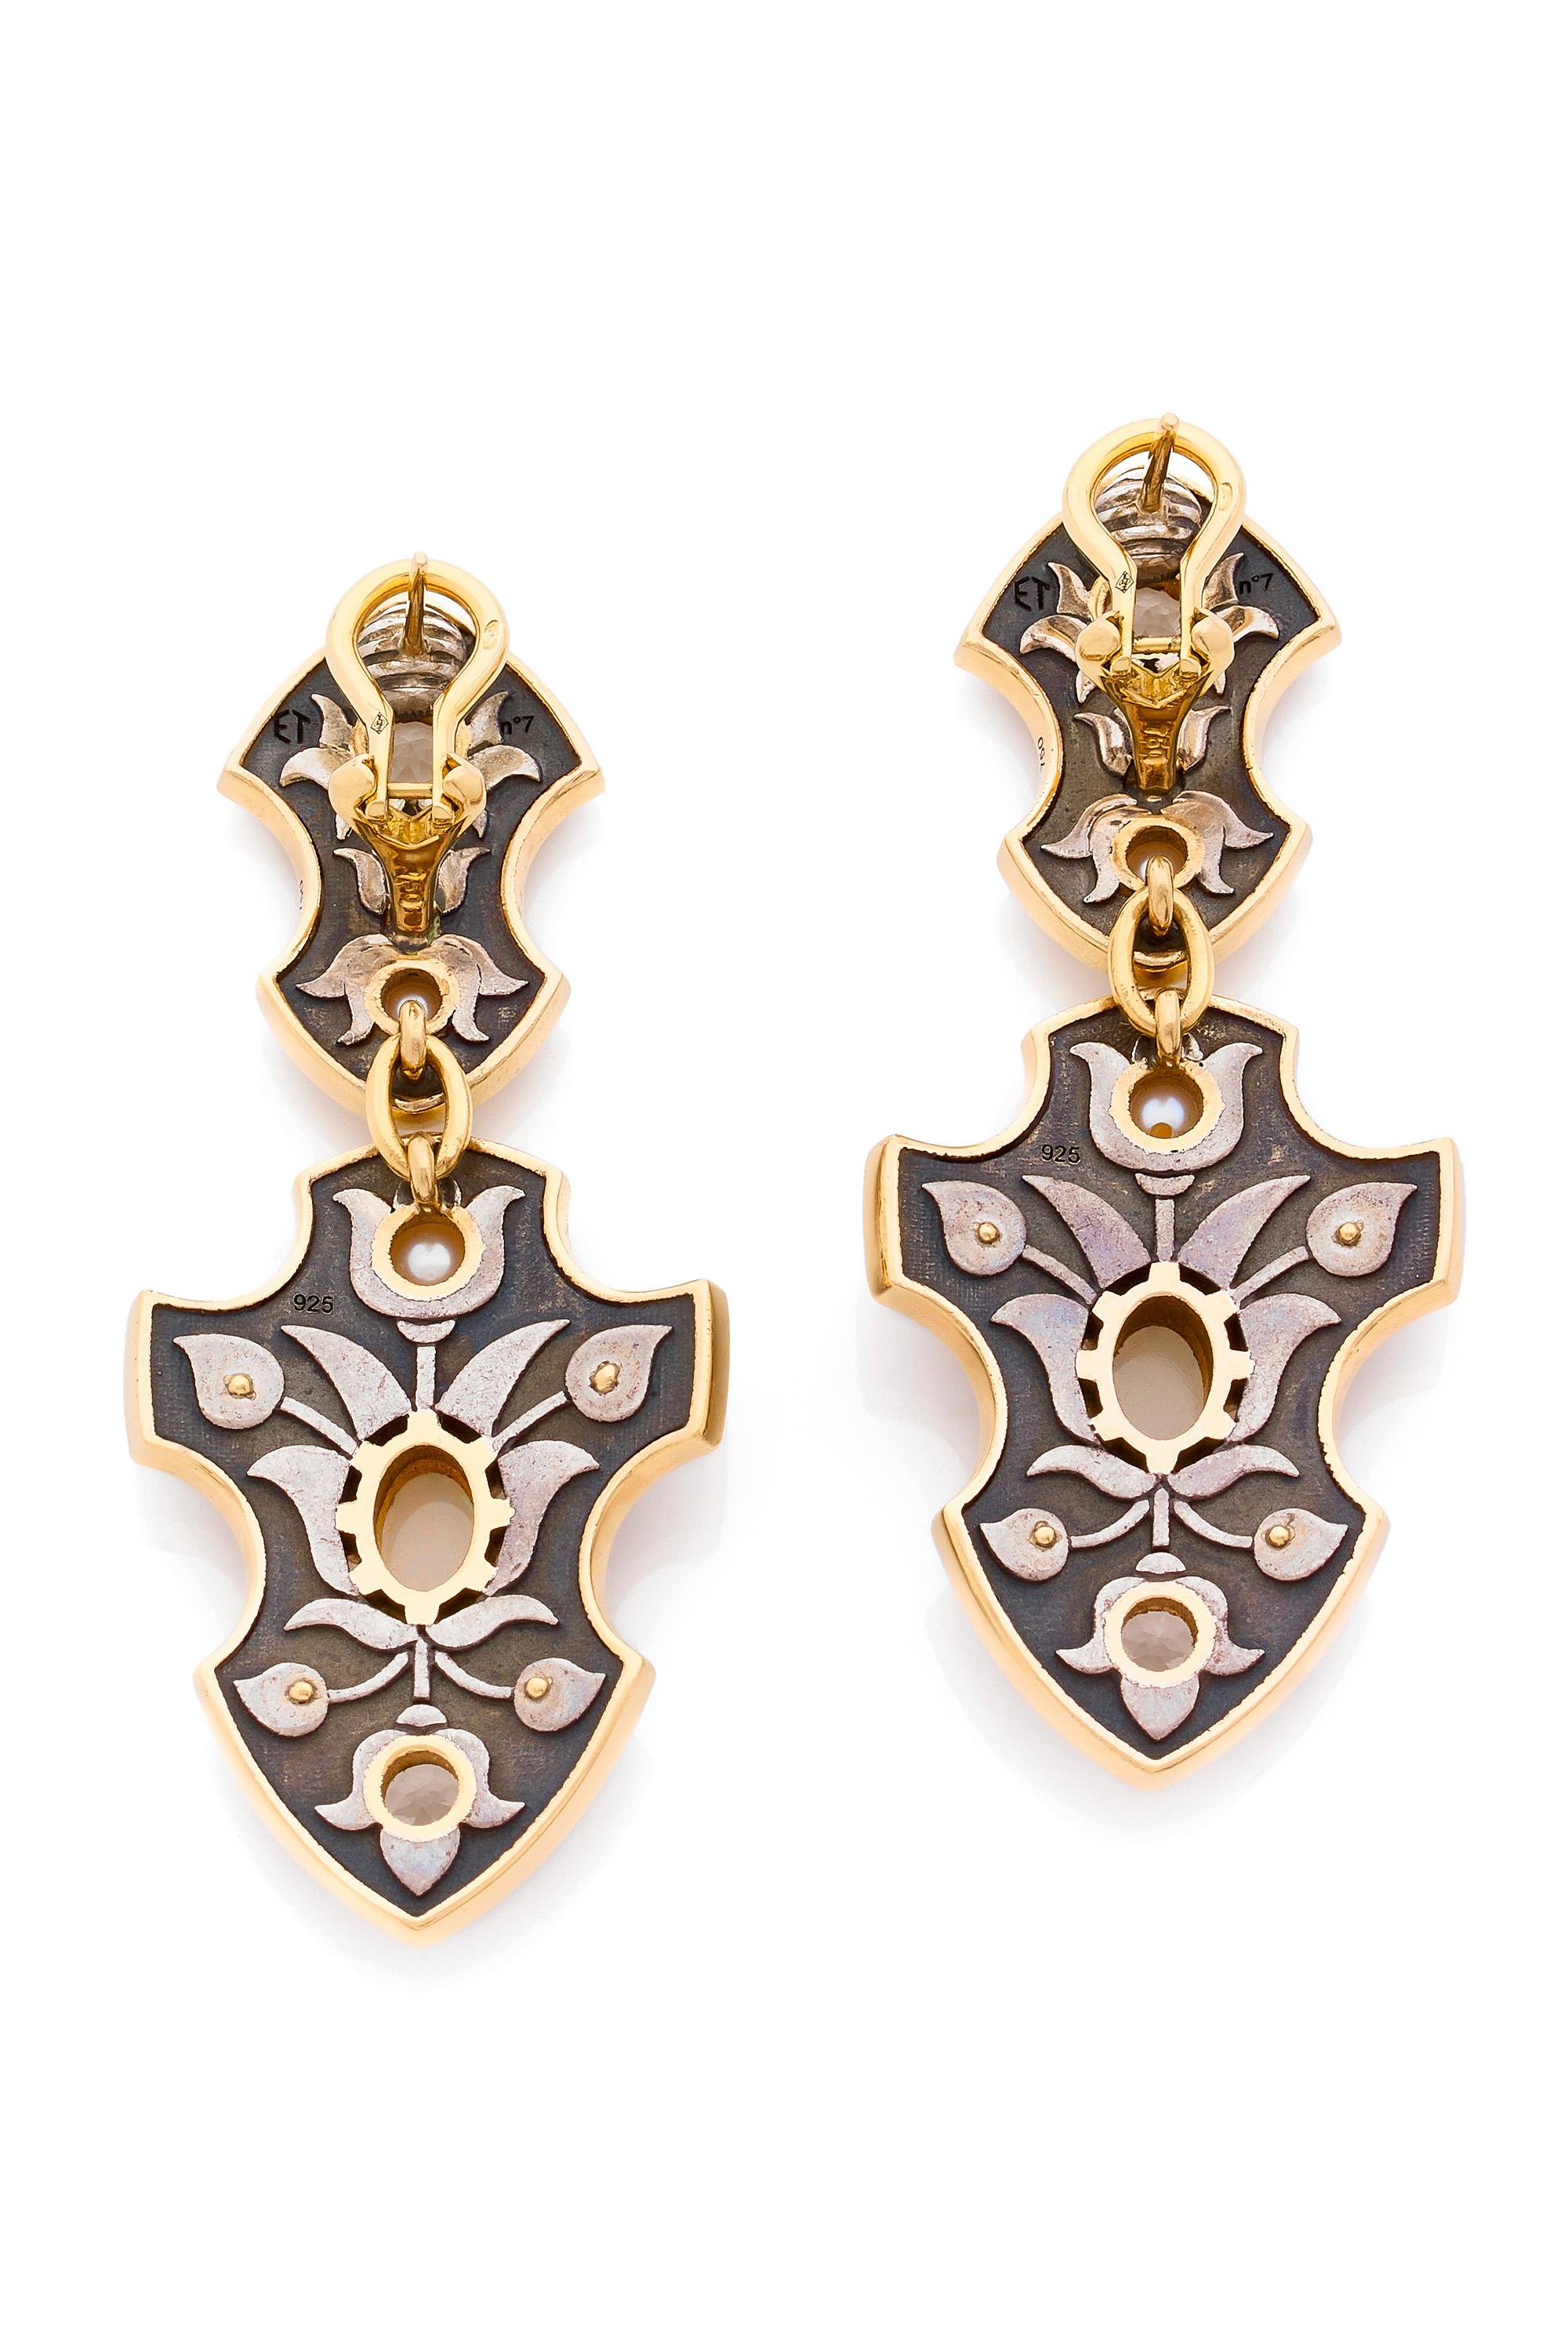 Neoclassical Opal, Topaz and Akoya Pearls Blason Earrings in 18k Yellow Gold by Elie Top For Sale